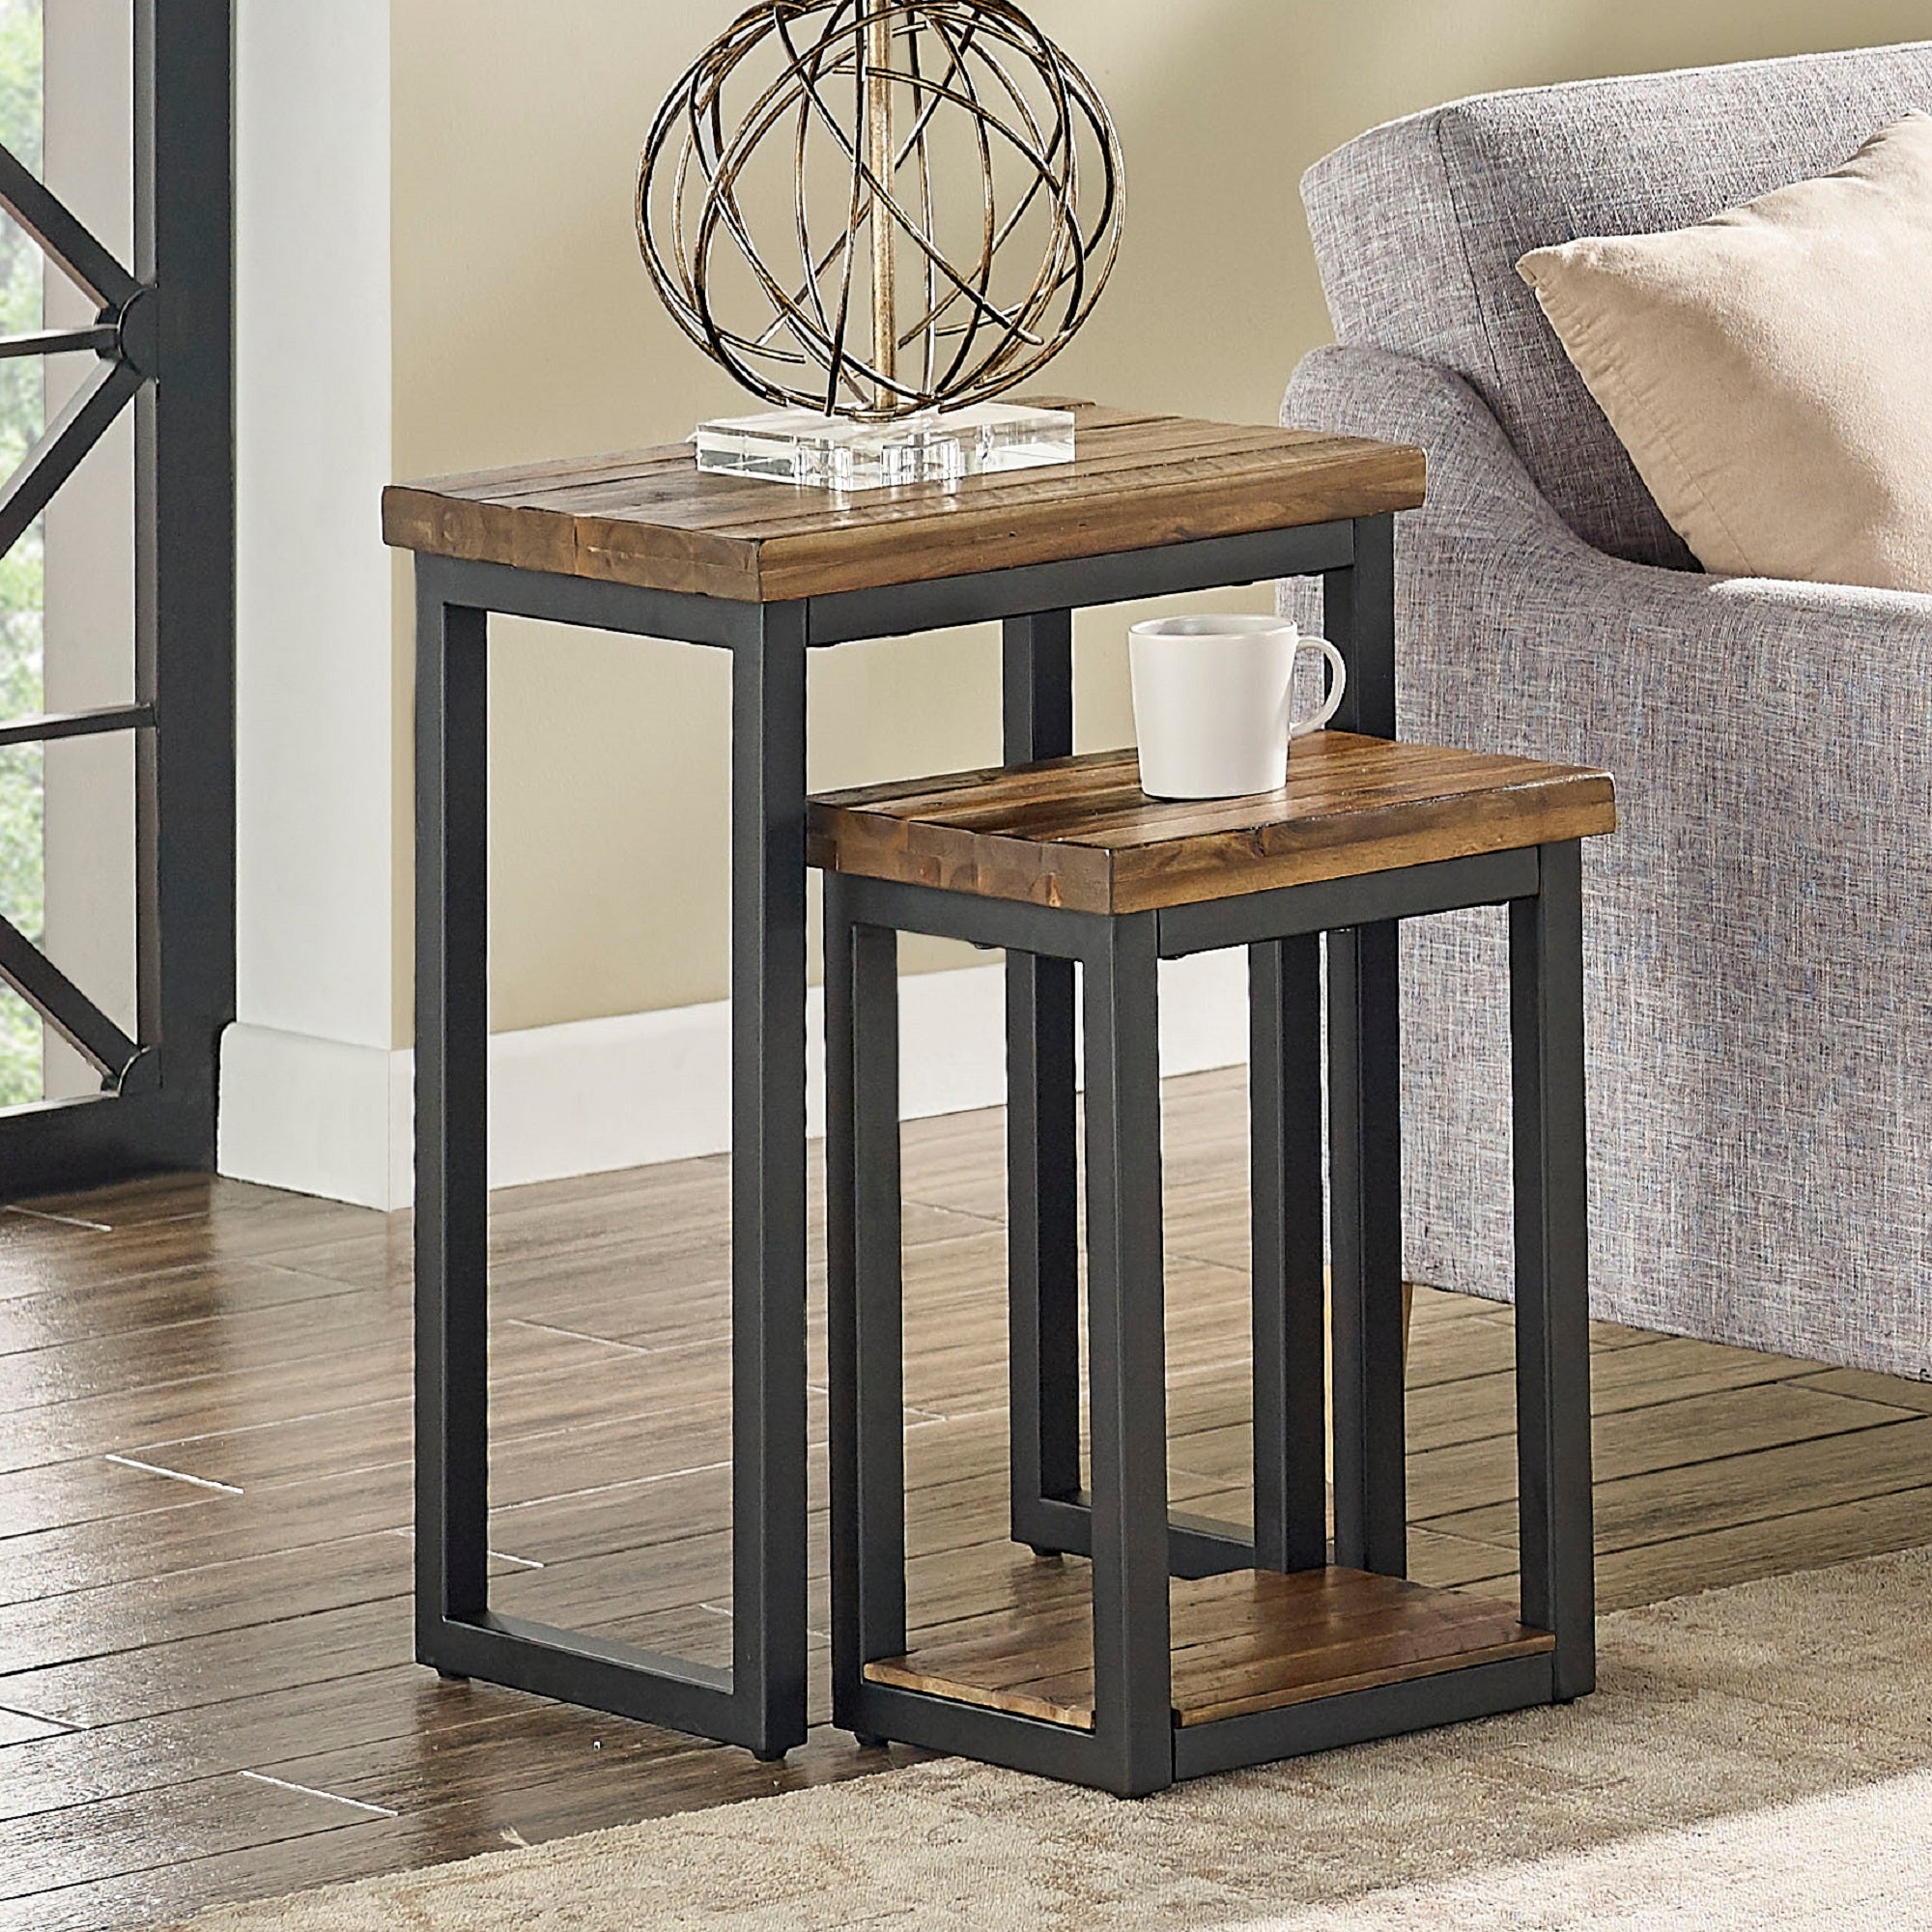 claremont rustic wood nesting end tables set of twoend tables 522216